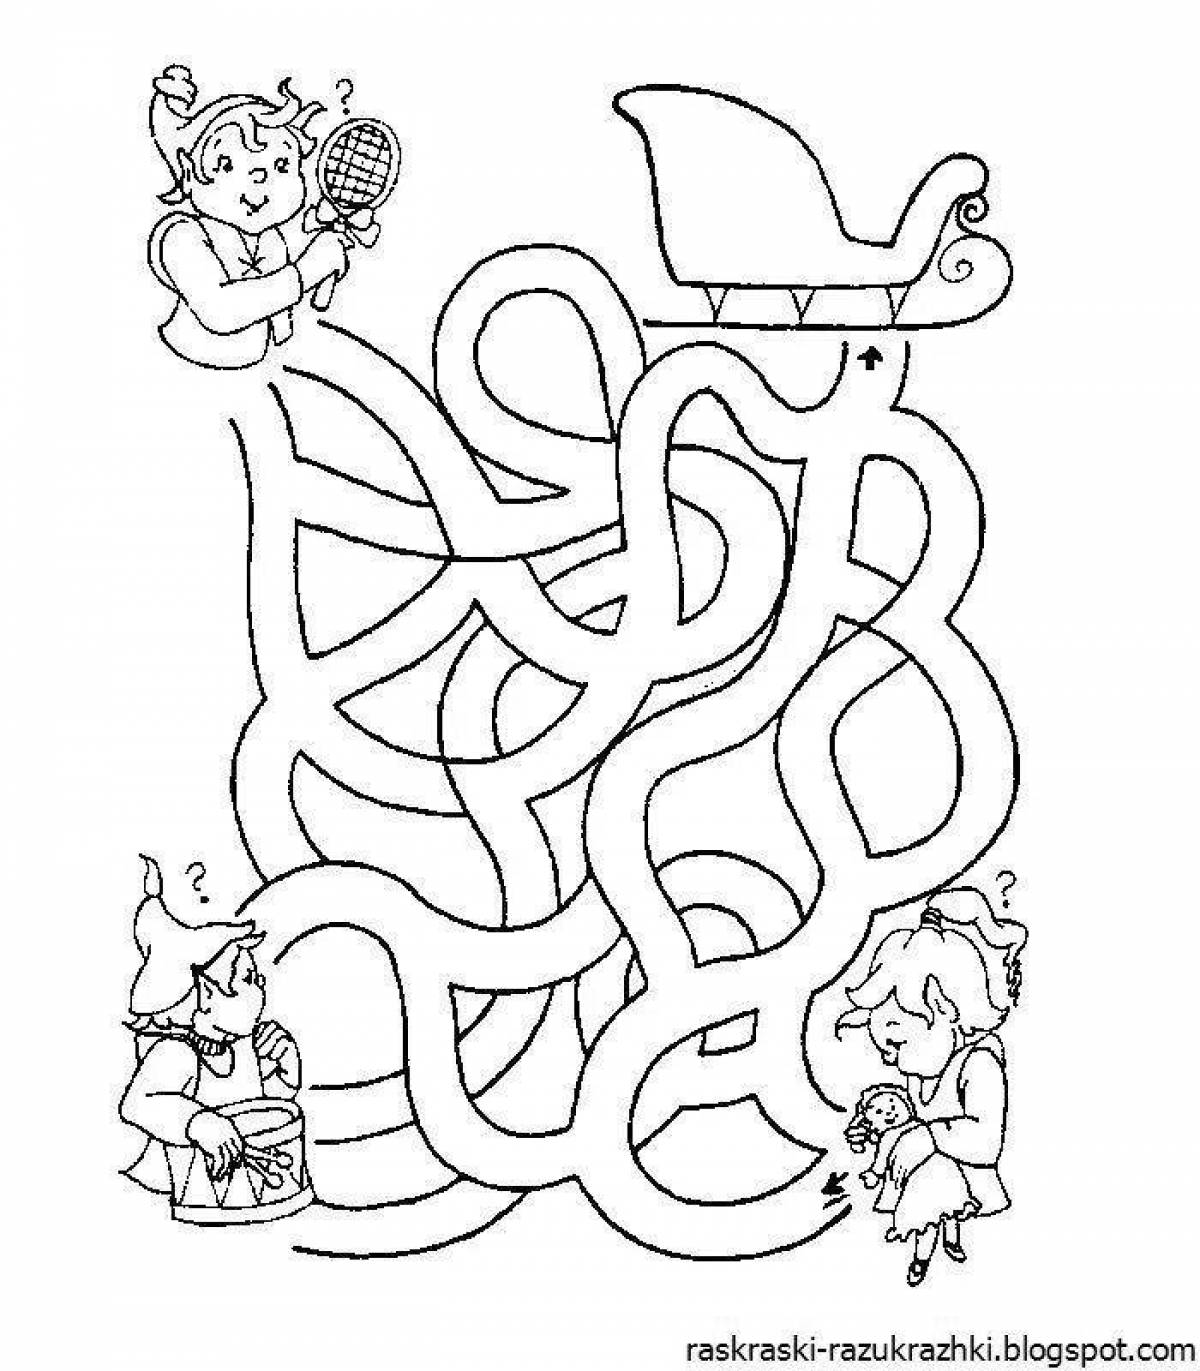 Adorable maze coloring book for kids